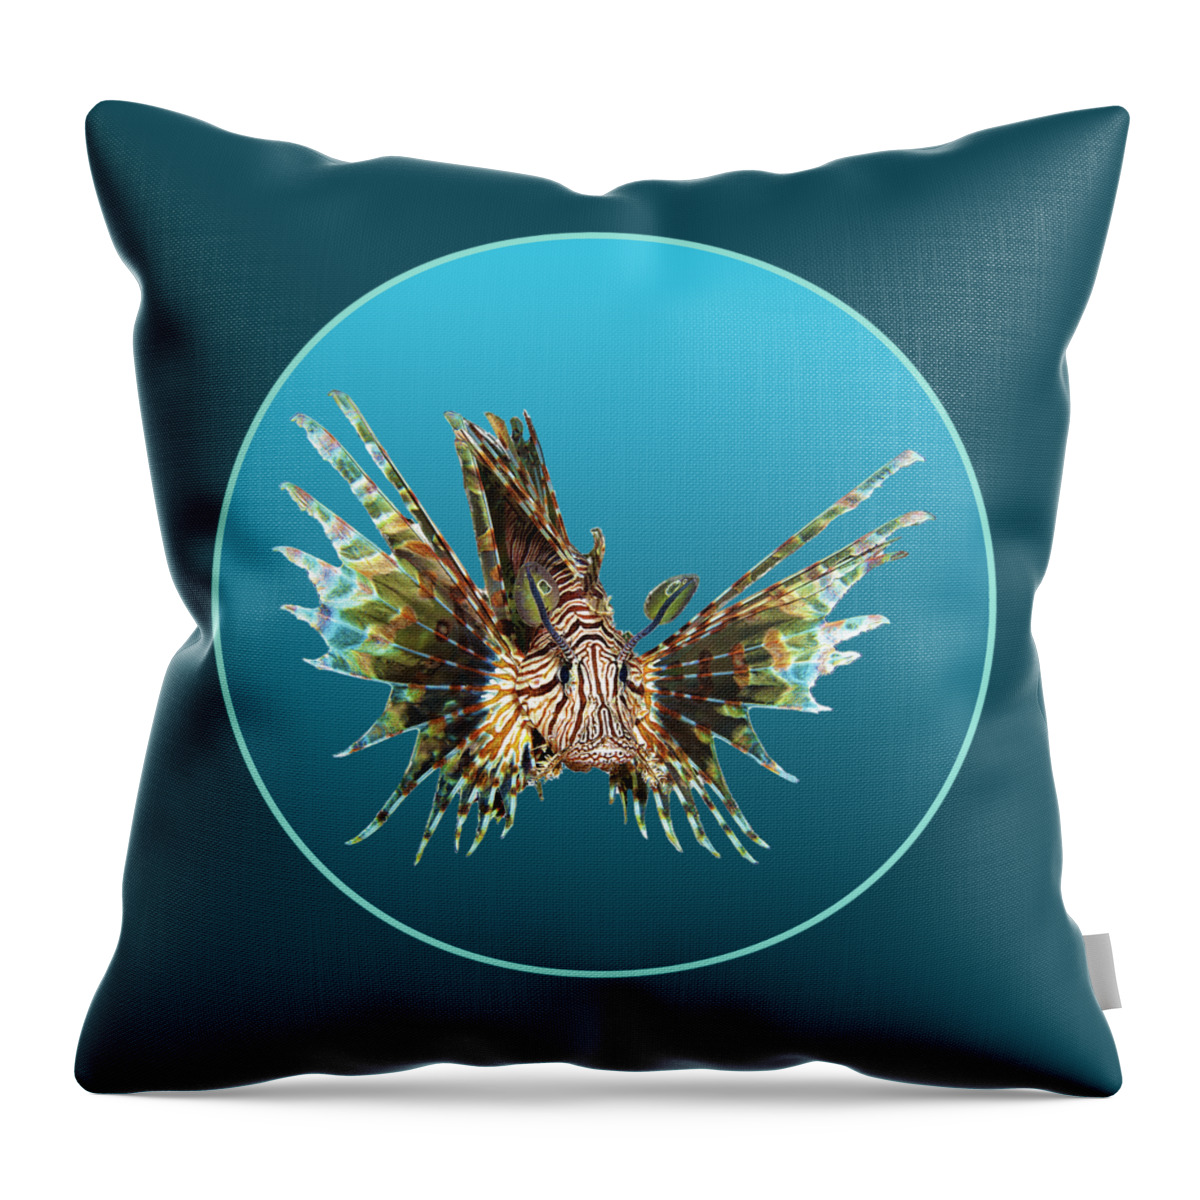 Lionfish Throw Pillow featuring the mixed media Magic lionfish in a circle in blurry blue - by Ute Niemann